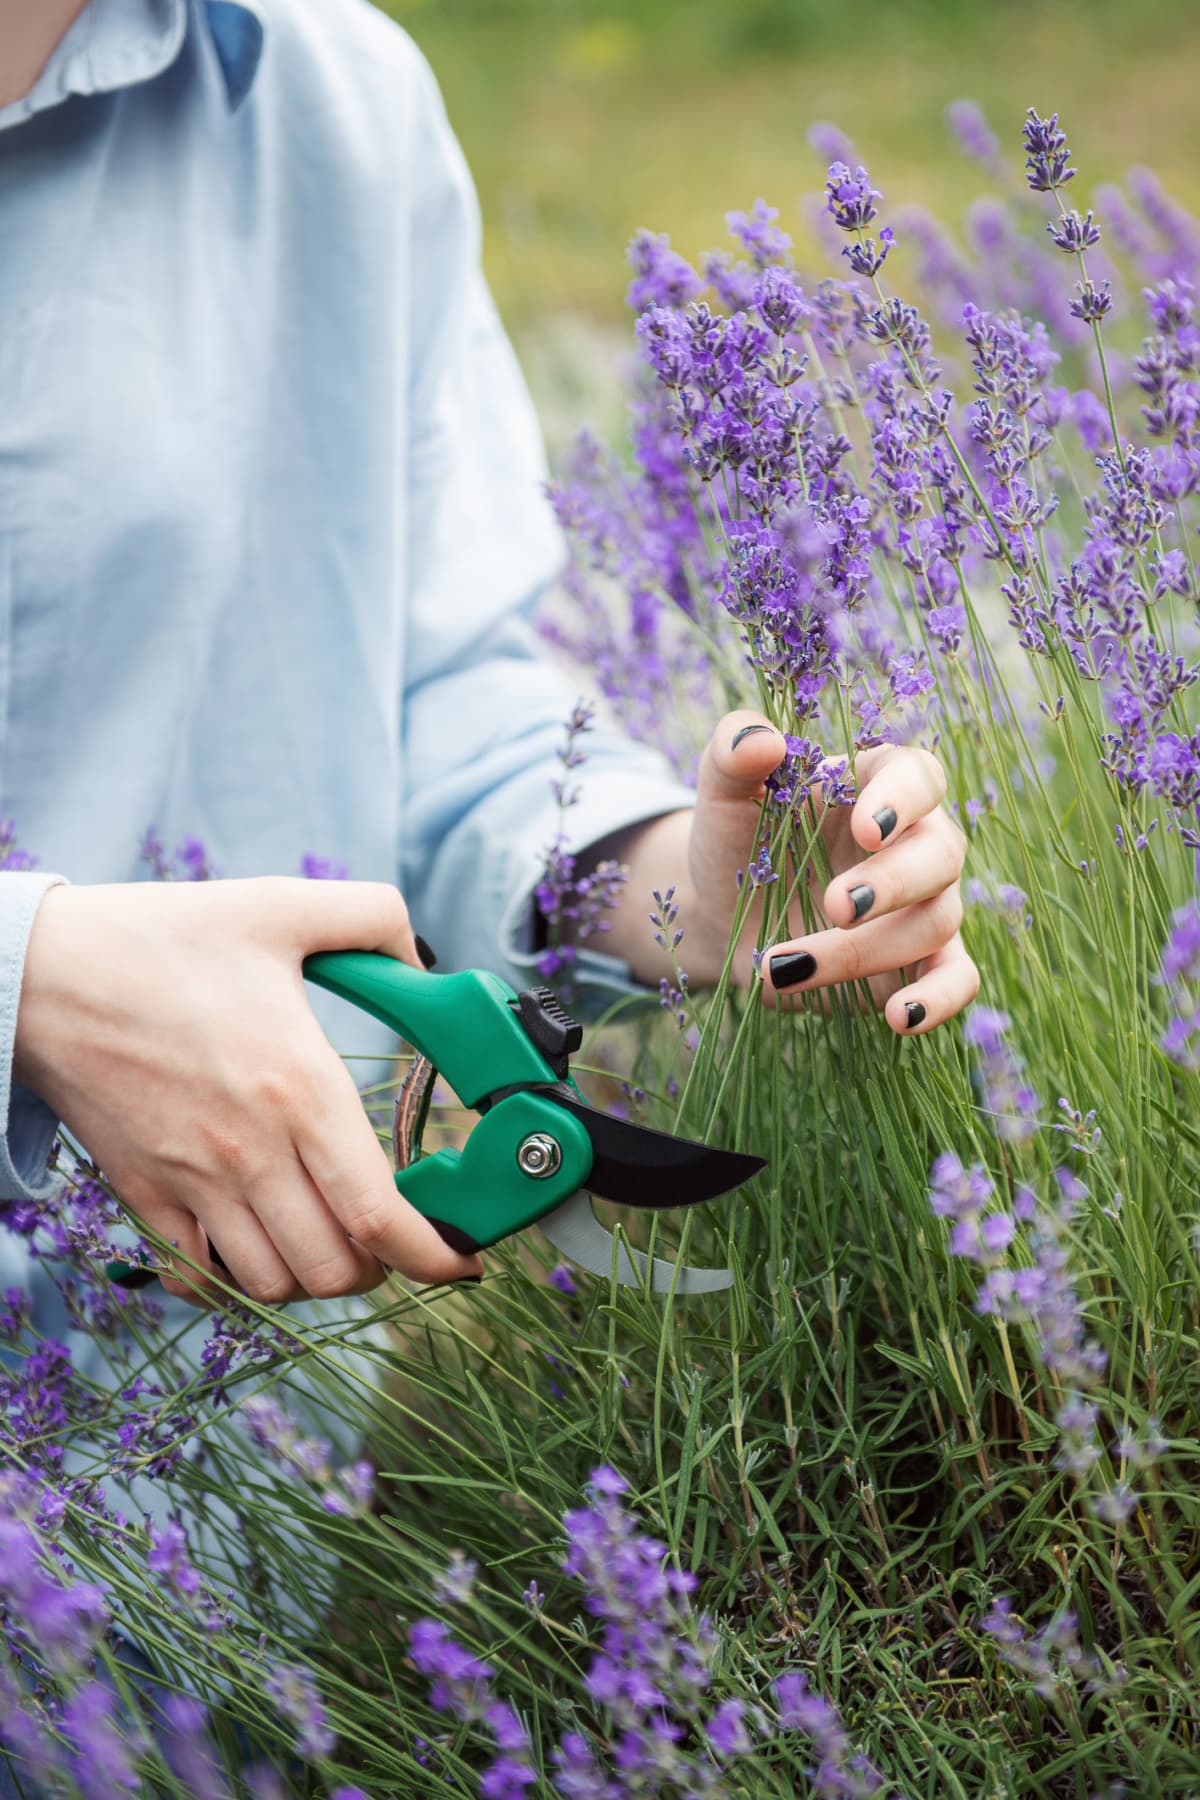 A young girl uses secateurs to cut lavender